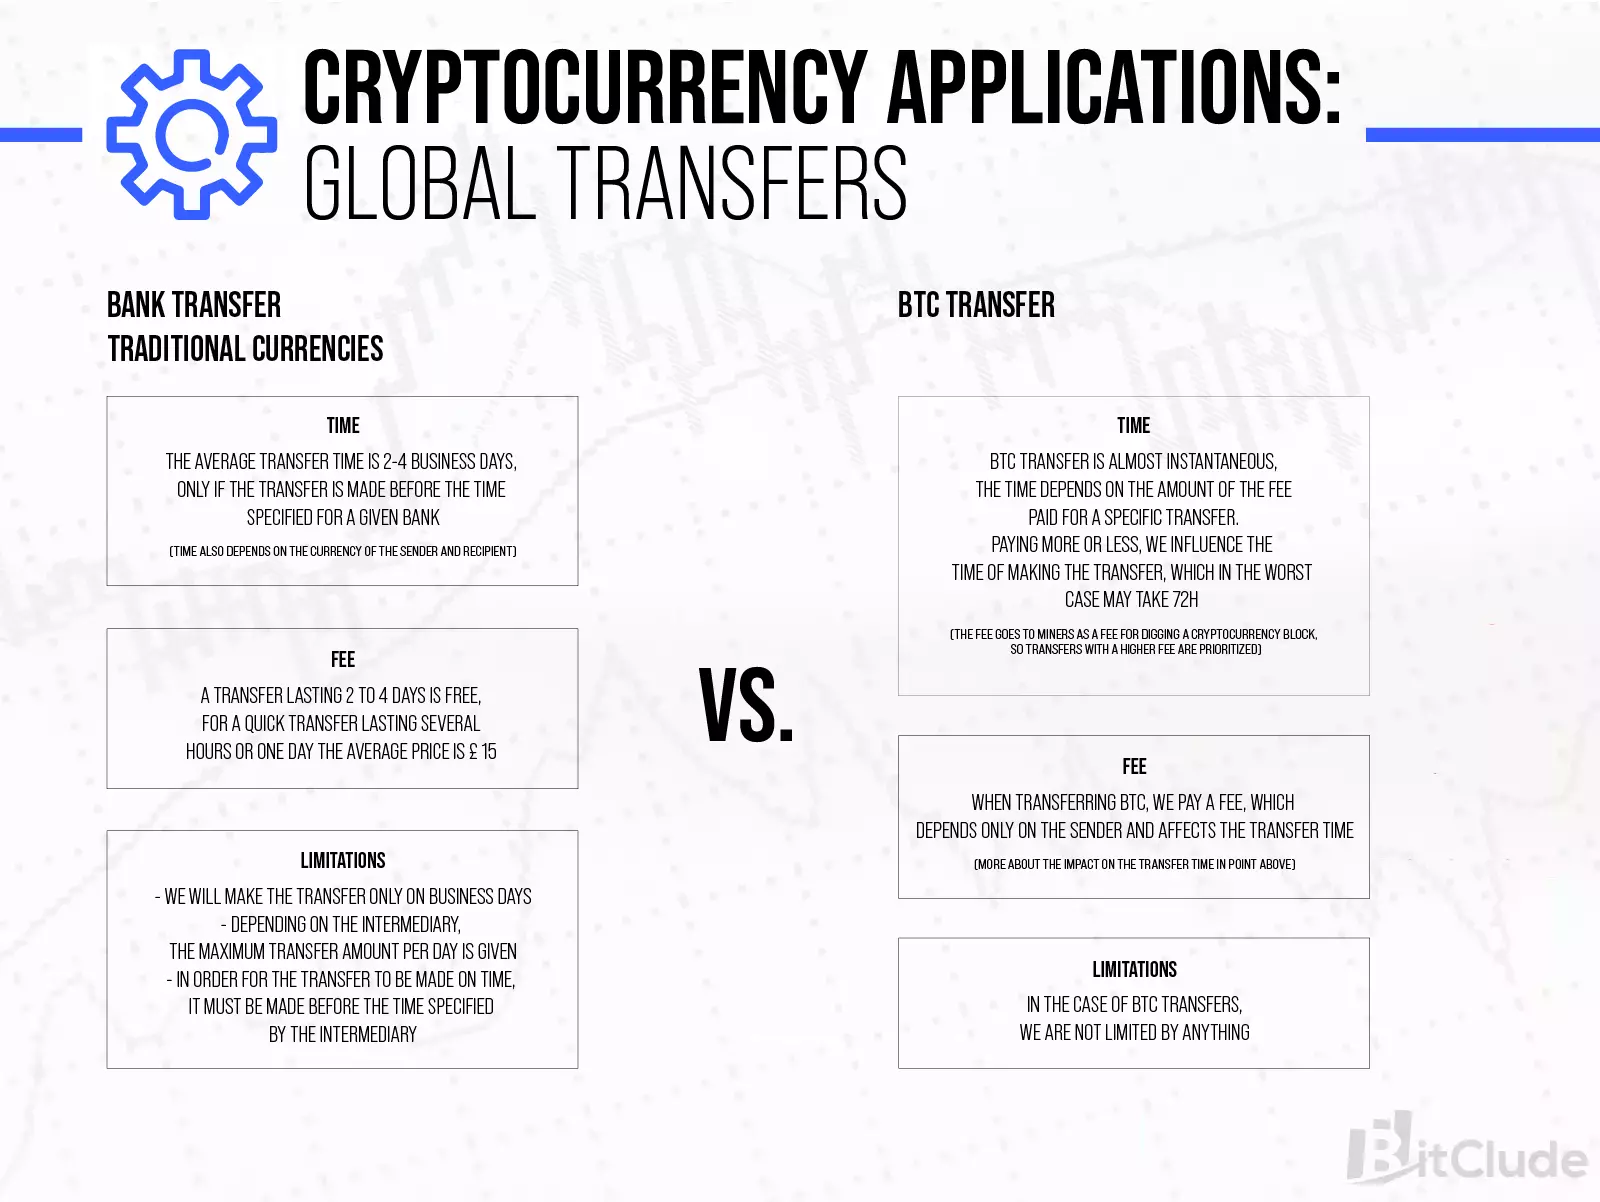 The main use of cryptocurrencies is instant global transfers, costing much less than bank transfers.